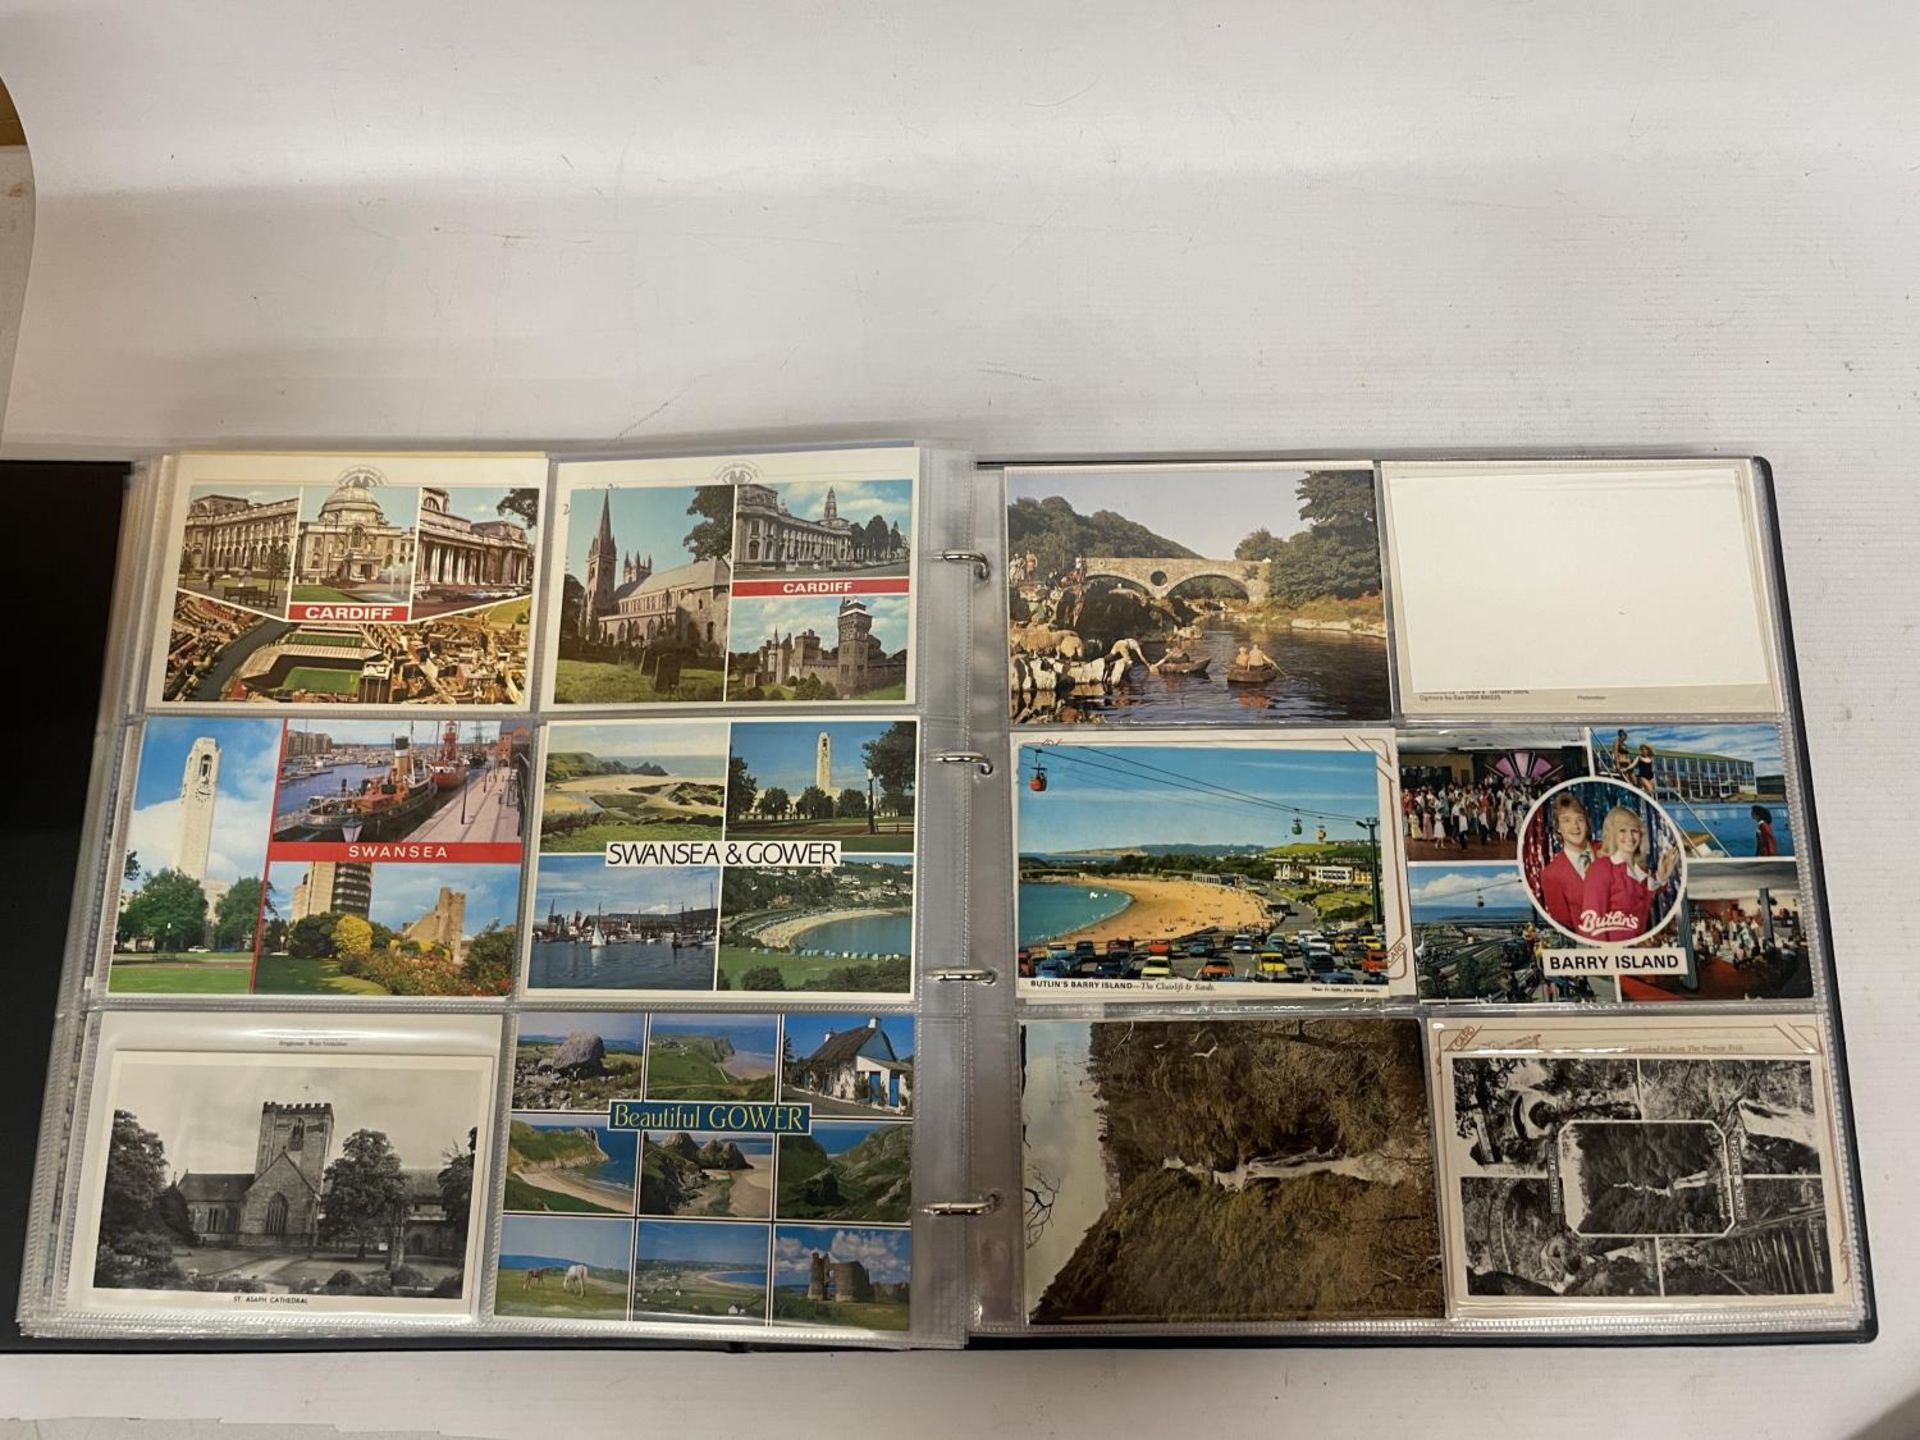 APPROXIMATELY 435 POSTCARDS RELATING TO THE ISLE OF MAN, WALES AND IRELAND IN A FOLDER - Image 7 of 15